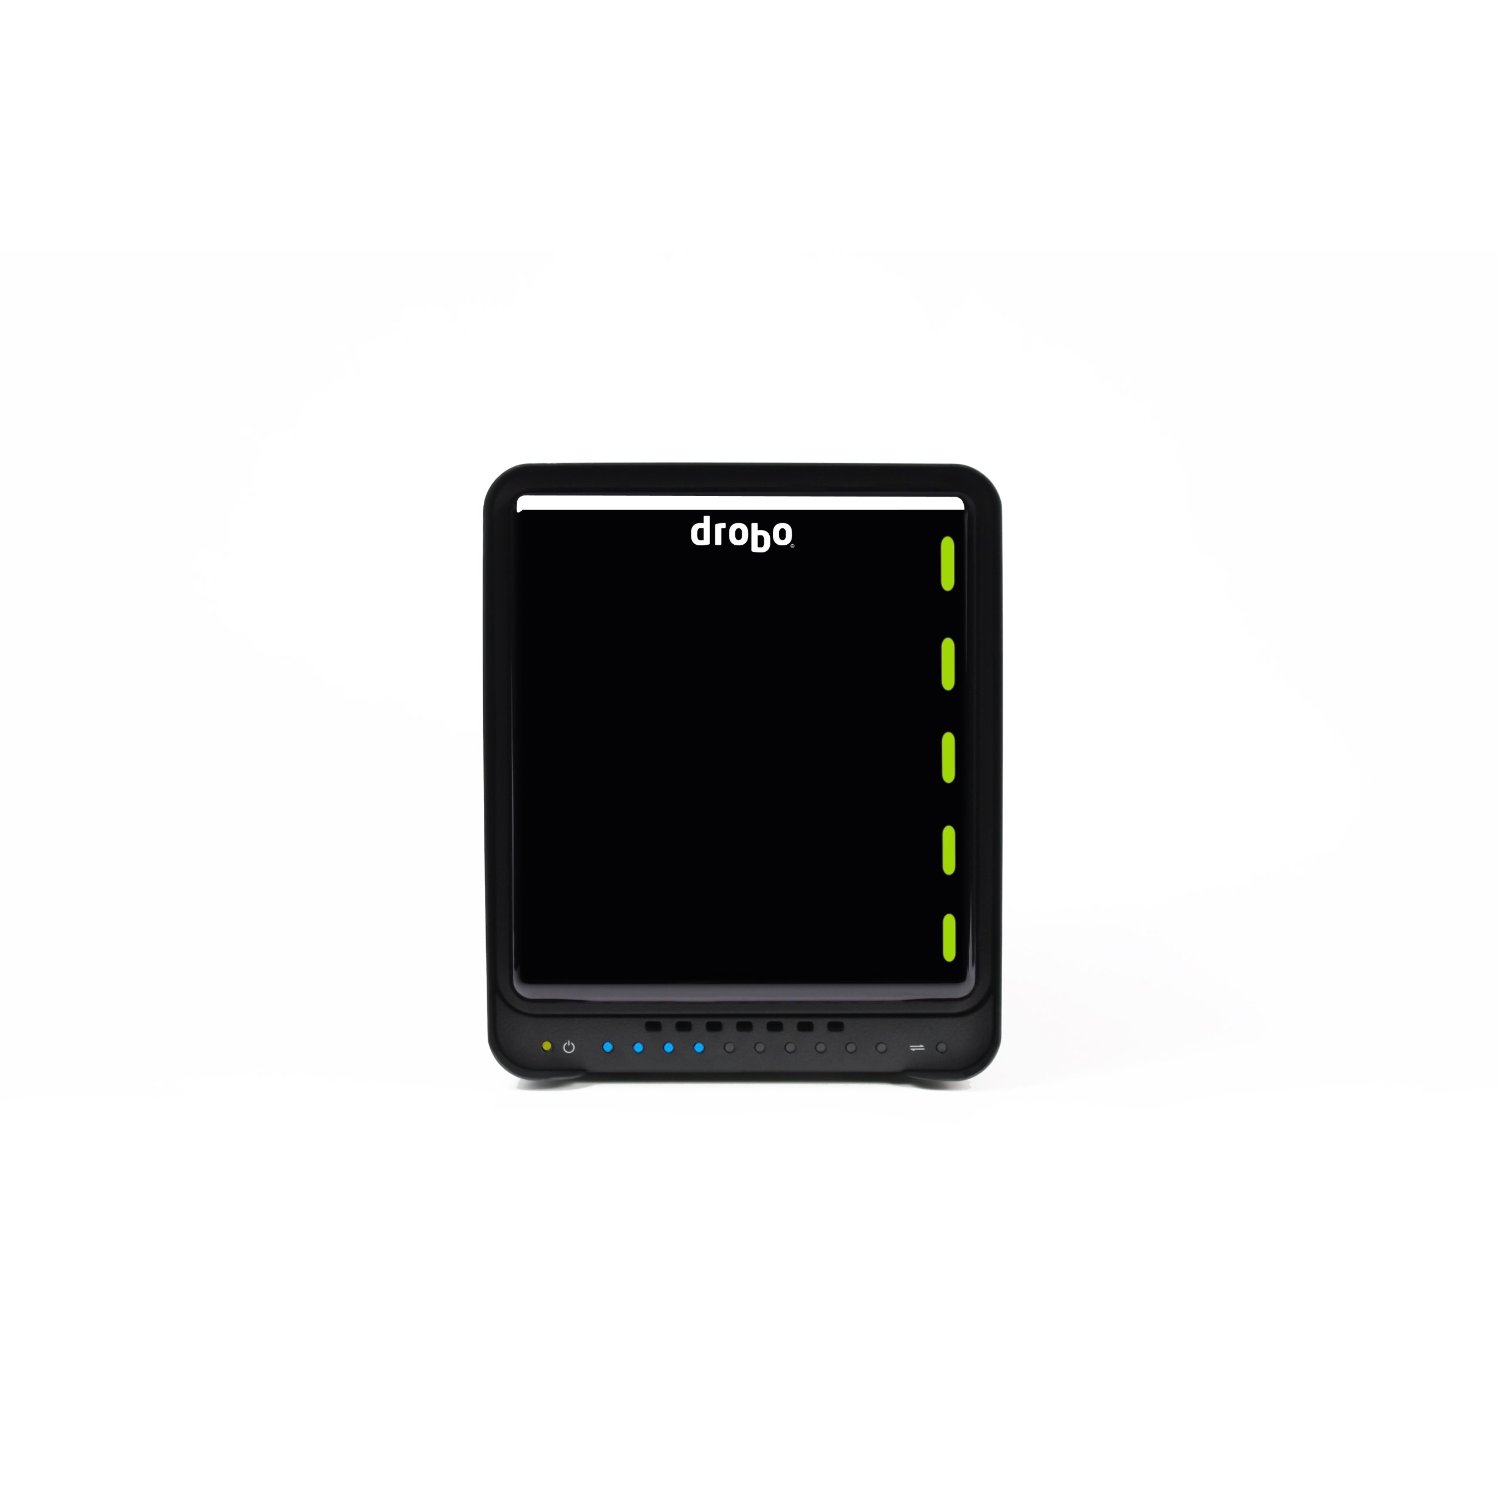 http://thetechjournal.com/wp-content/uploads/images/1110/1320063726-drobo-fs-5bay-gbe-storage-array-1.jpg